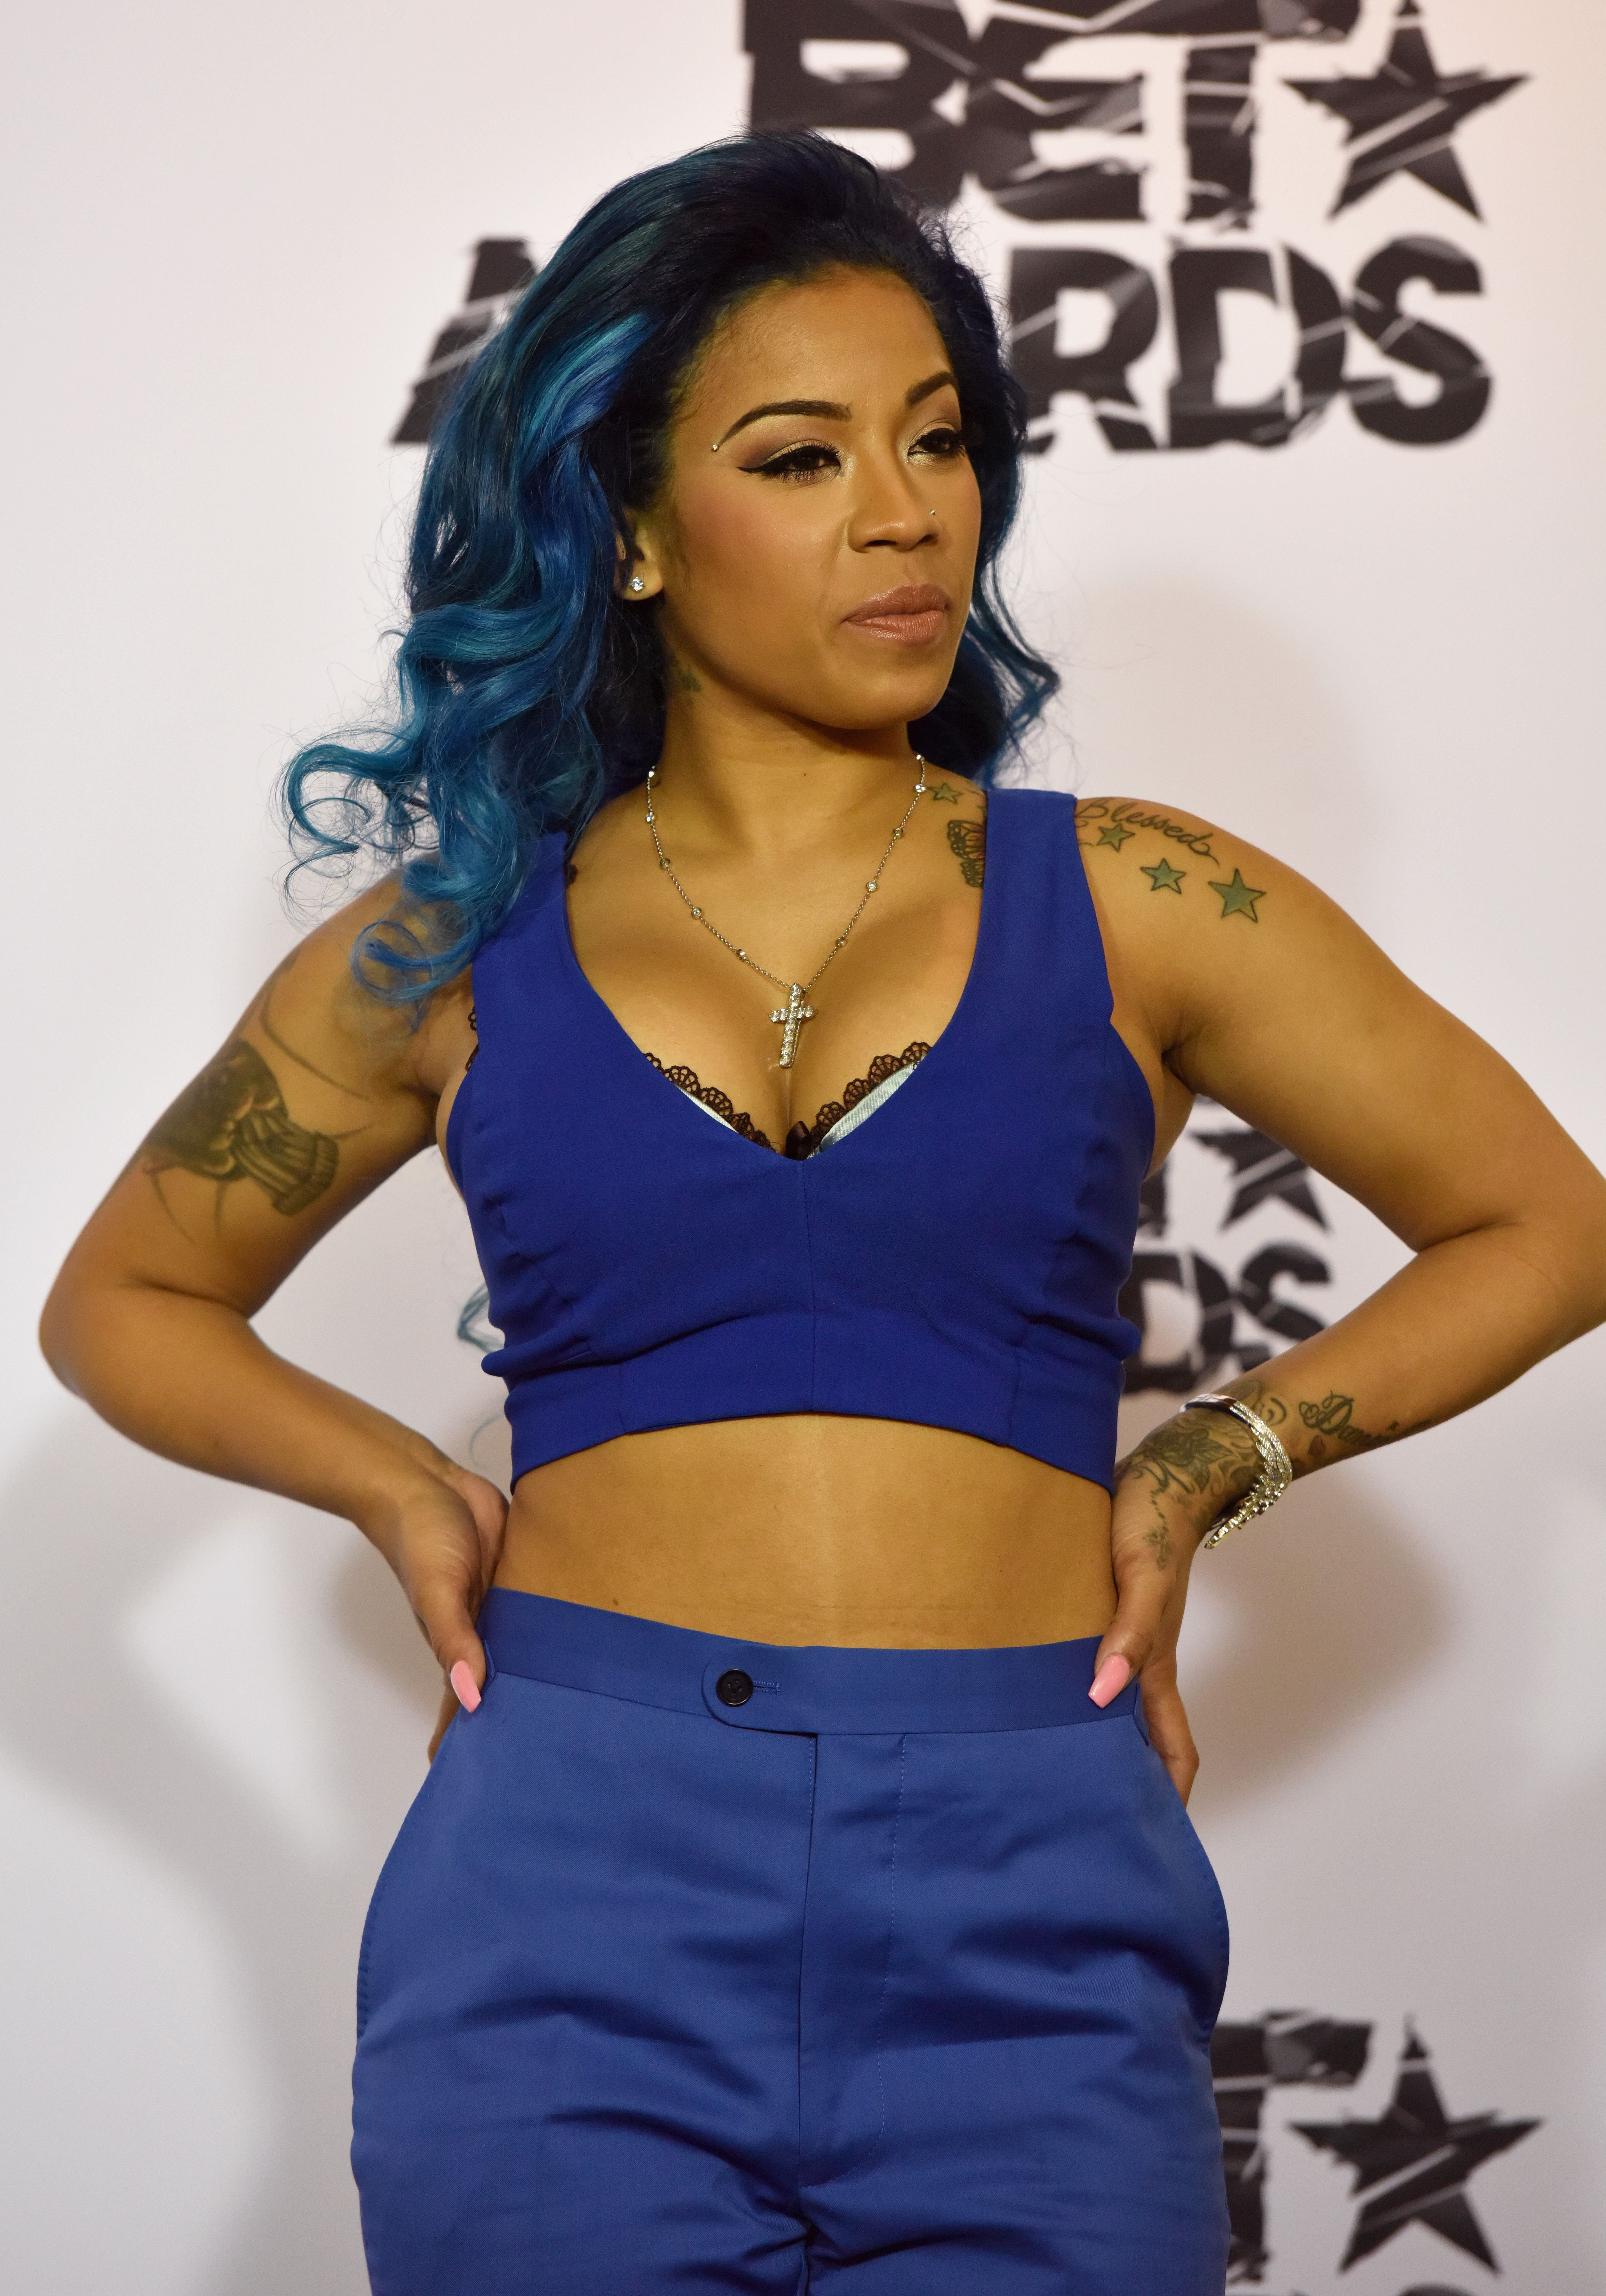 Keyshia Cole during the 2015 BET Awards at the Microsoft Theater on June 28, 2015 in Los Angeles, California. | Source: Getty Images